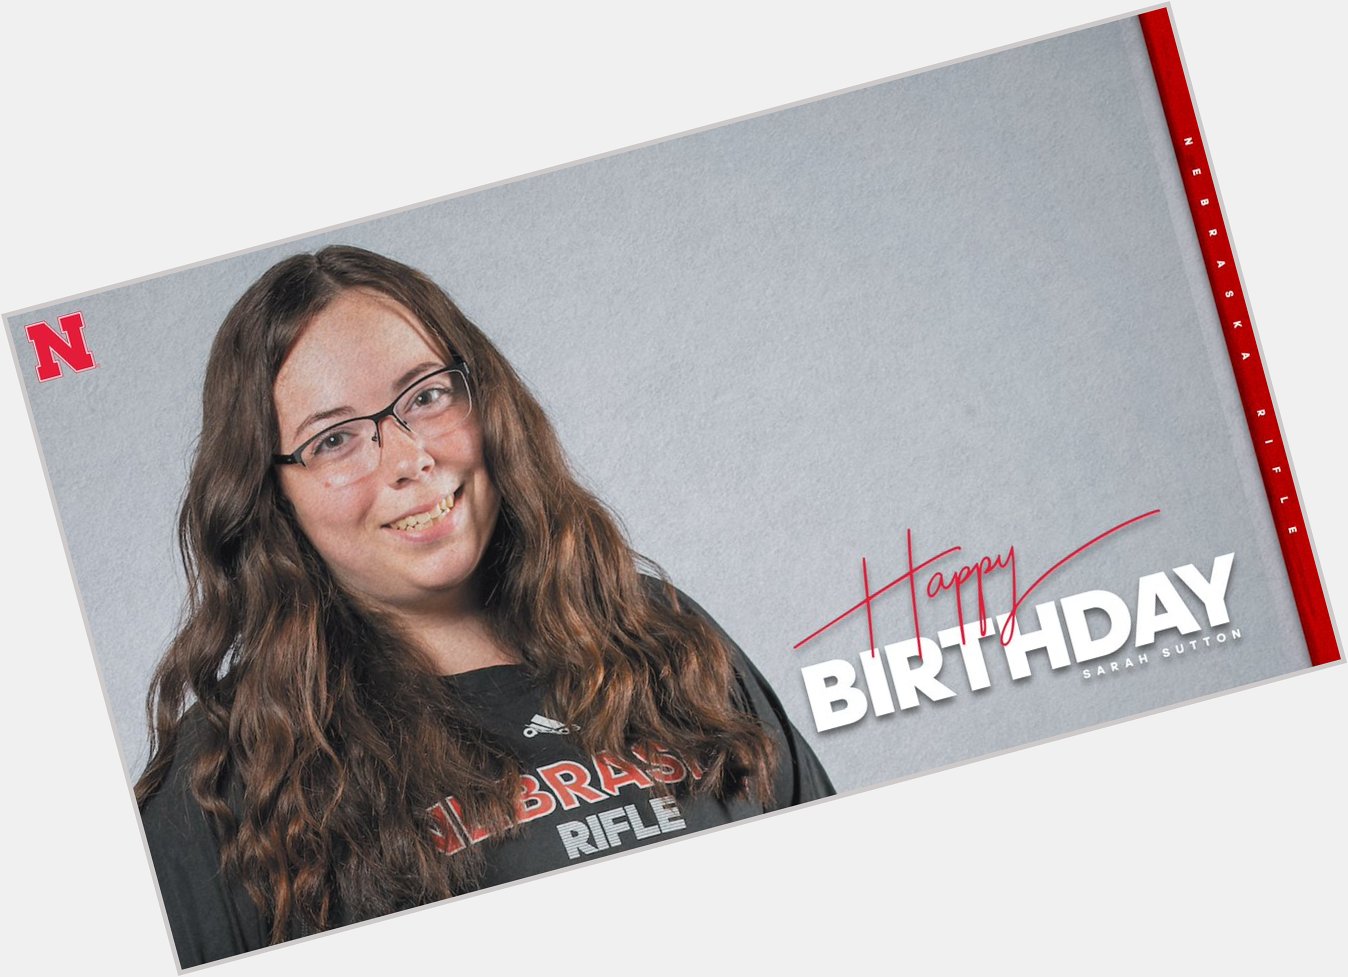 A very happy birthday to our very own Sarah Sutton!  